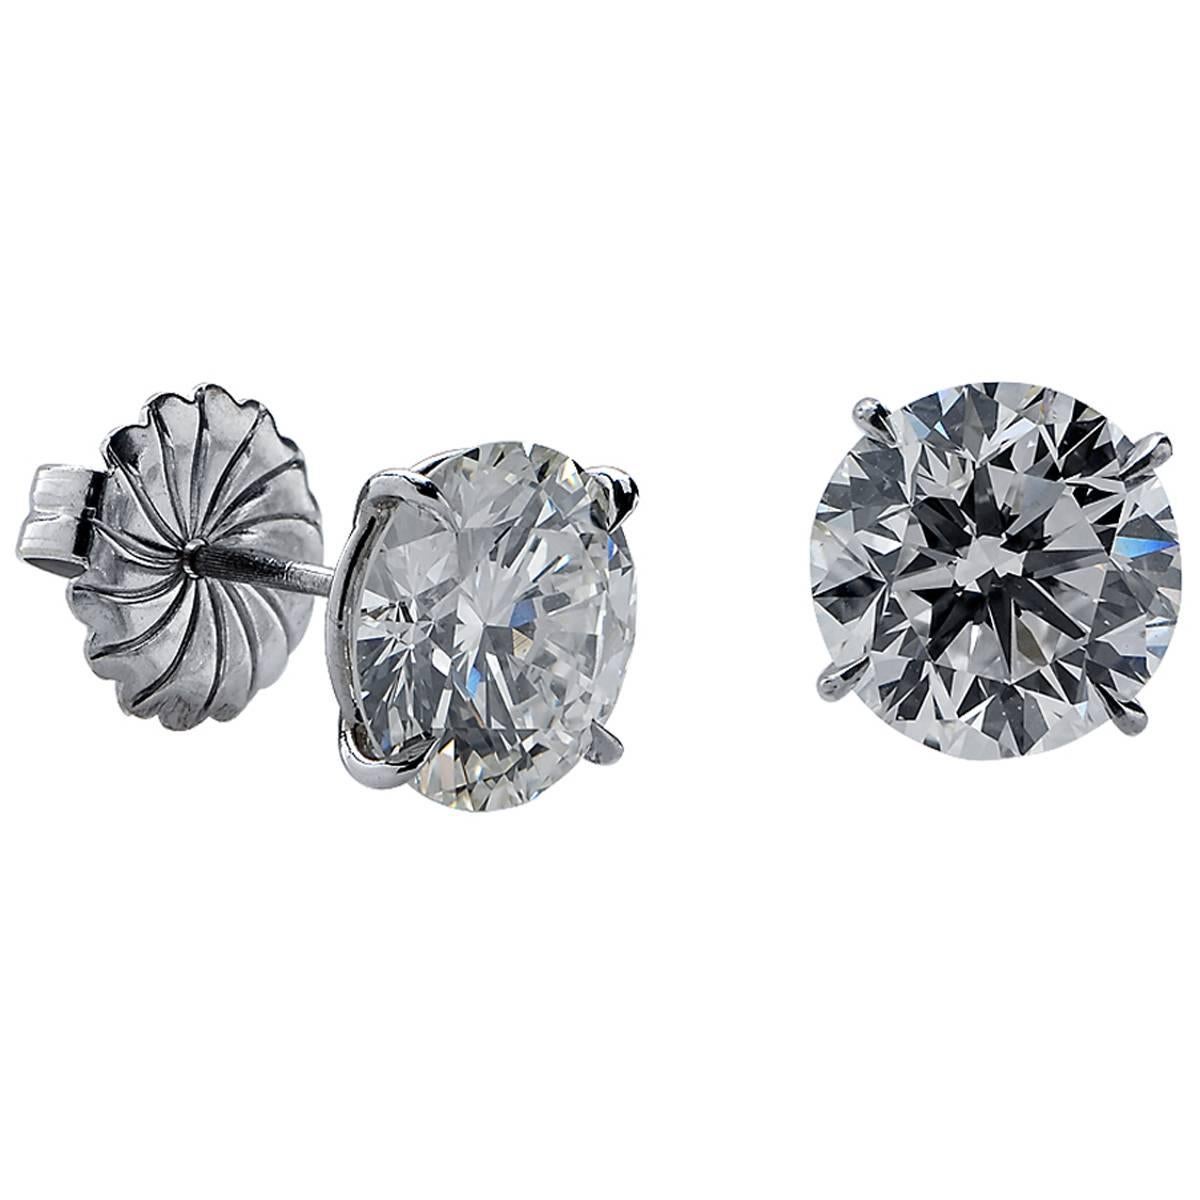 Beautiful platinum solitaire stud earrings featuring two bright and lively very well matched GIA graded round brilliant cut diamonds weighing 7.38cts total weight, L color, VS clarity.

The earrings are stamped and/or tested as platinum.
The metal